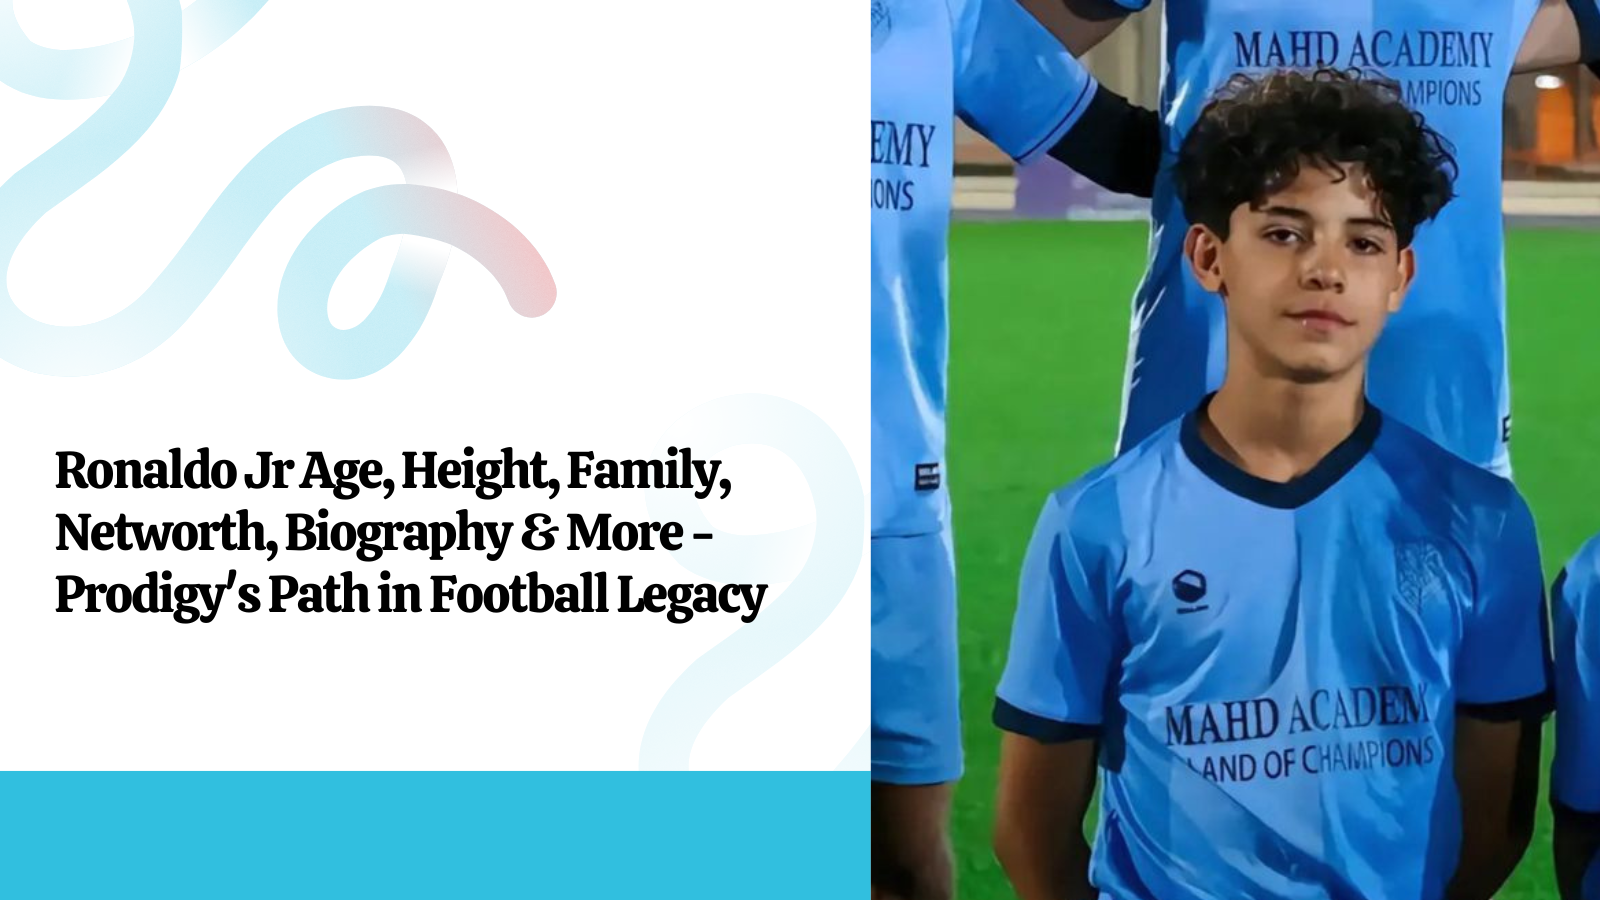 Ronaldo Jr Age, Height, Family, Networth, Biography & More - Prodigy's Path in Football Legacy